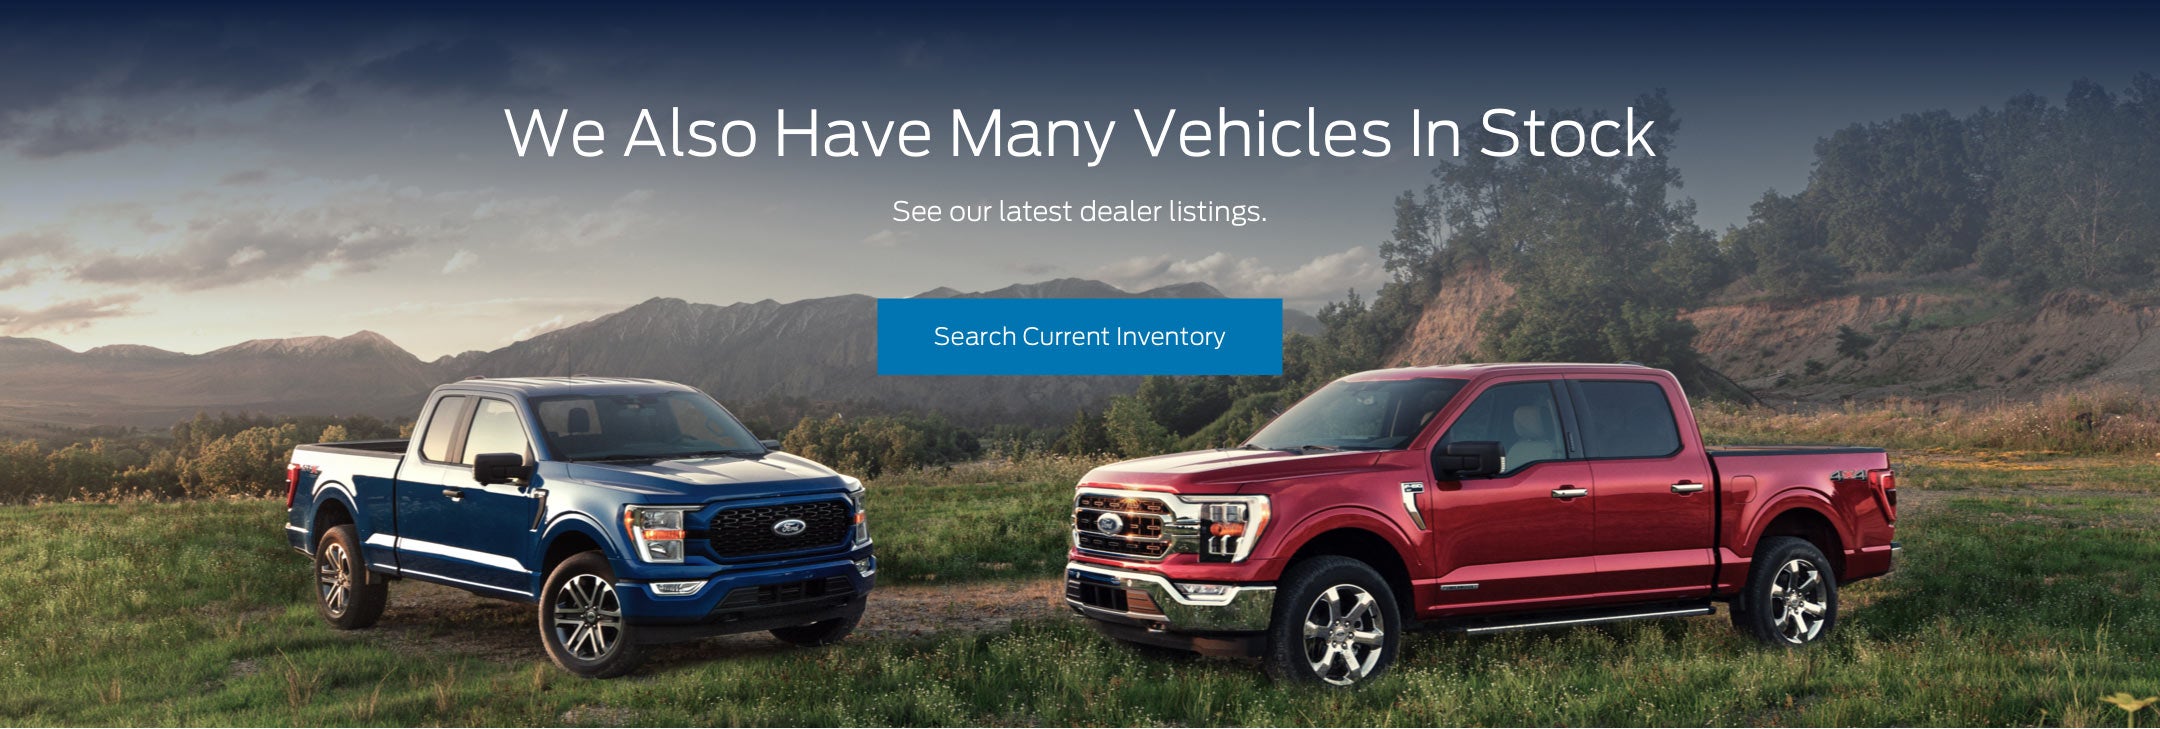 Ford vehicles in stock | Harry Robinson Sallisaw Ford in Sallisaw OK